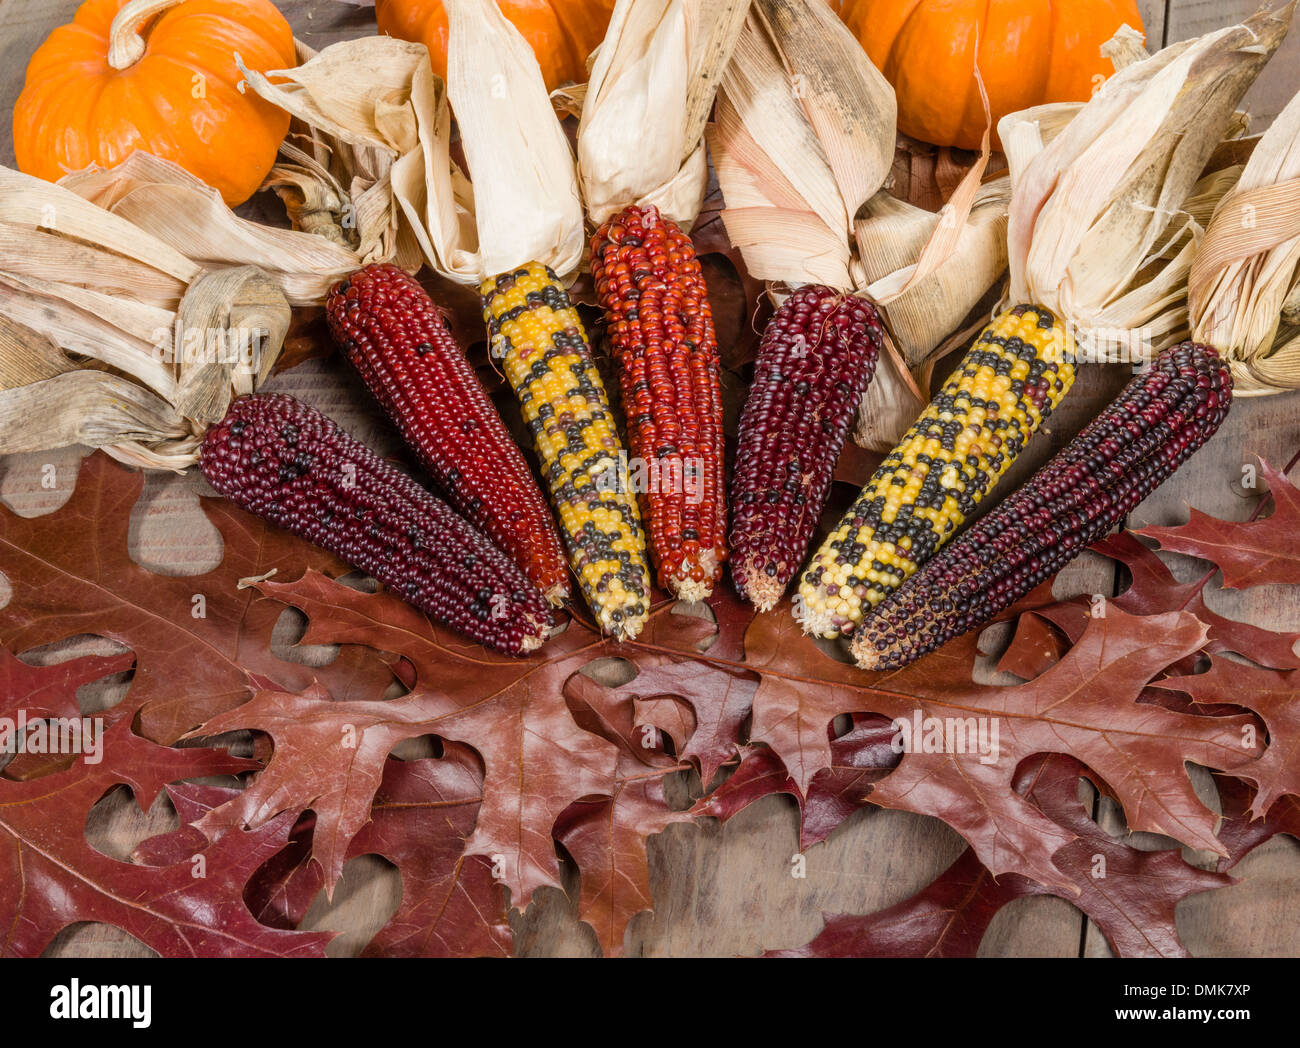 Decorative fall display with corn and leaves Stock Photo